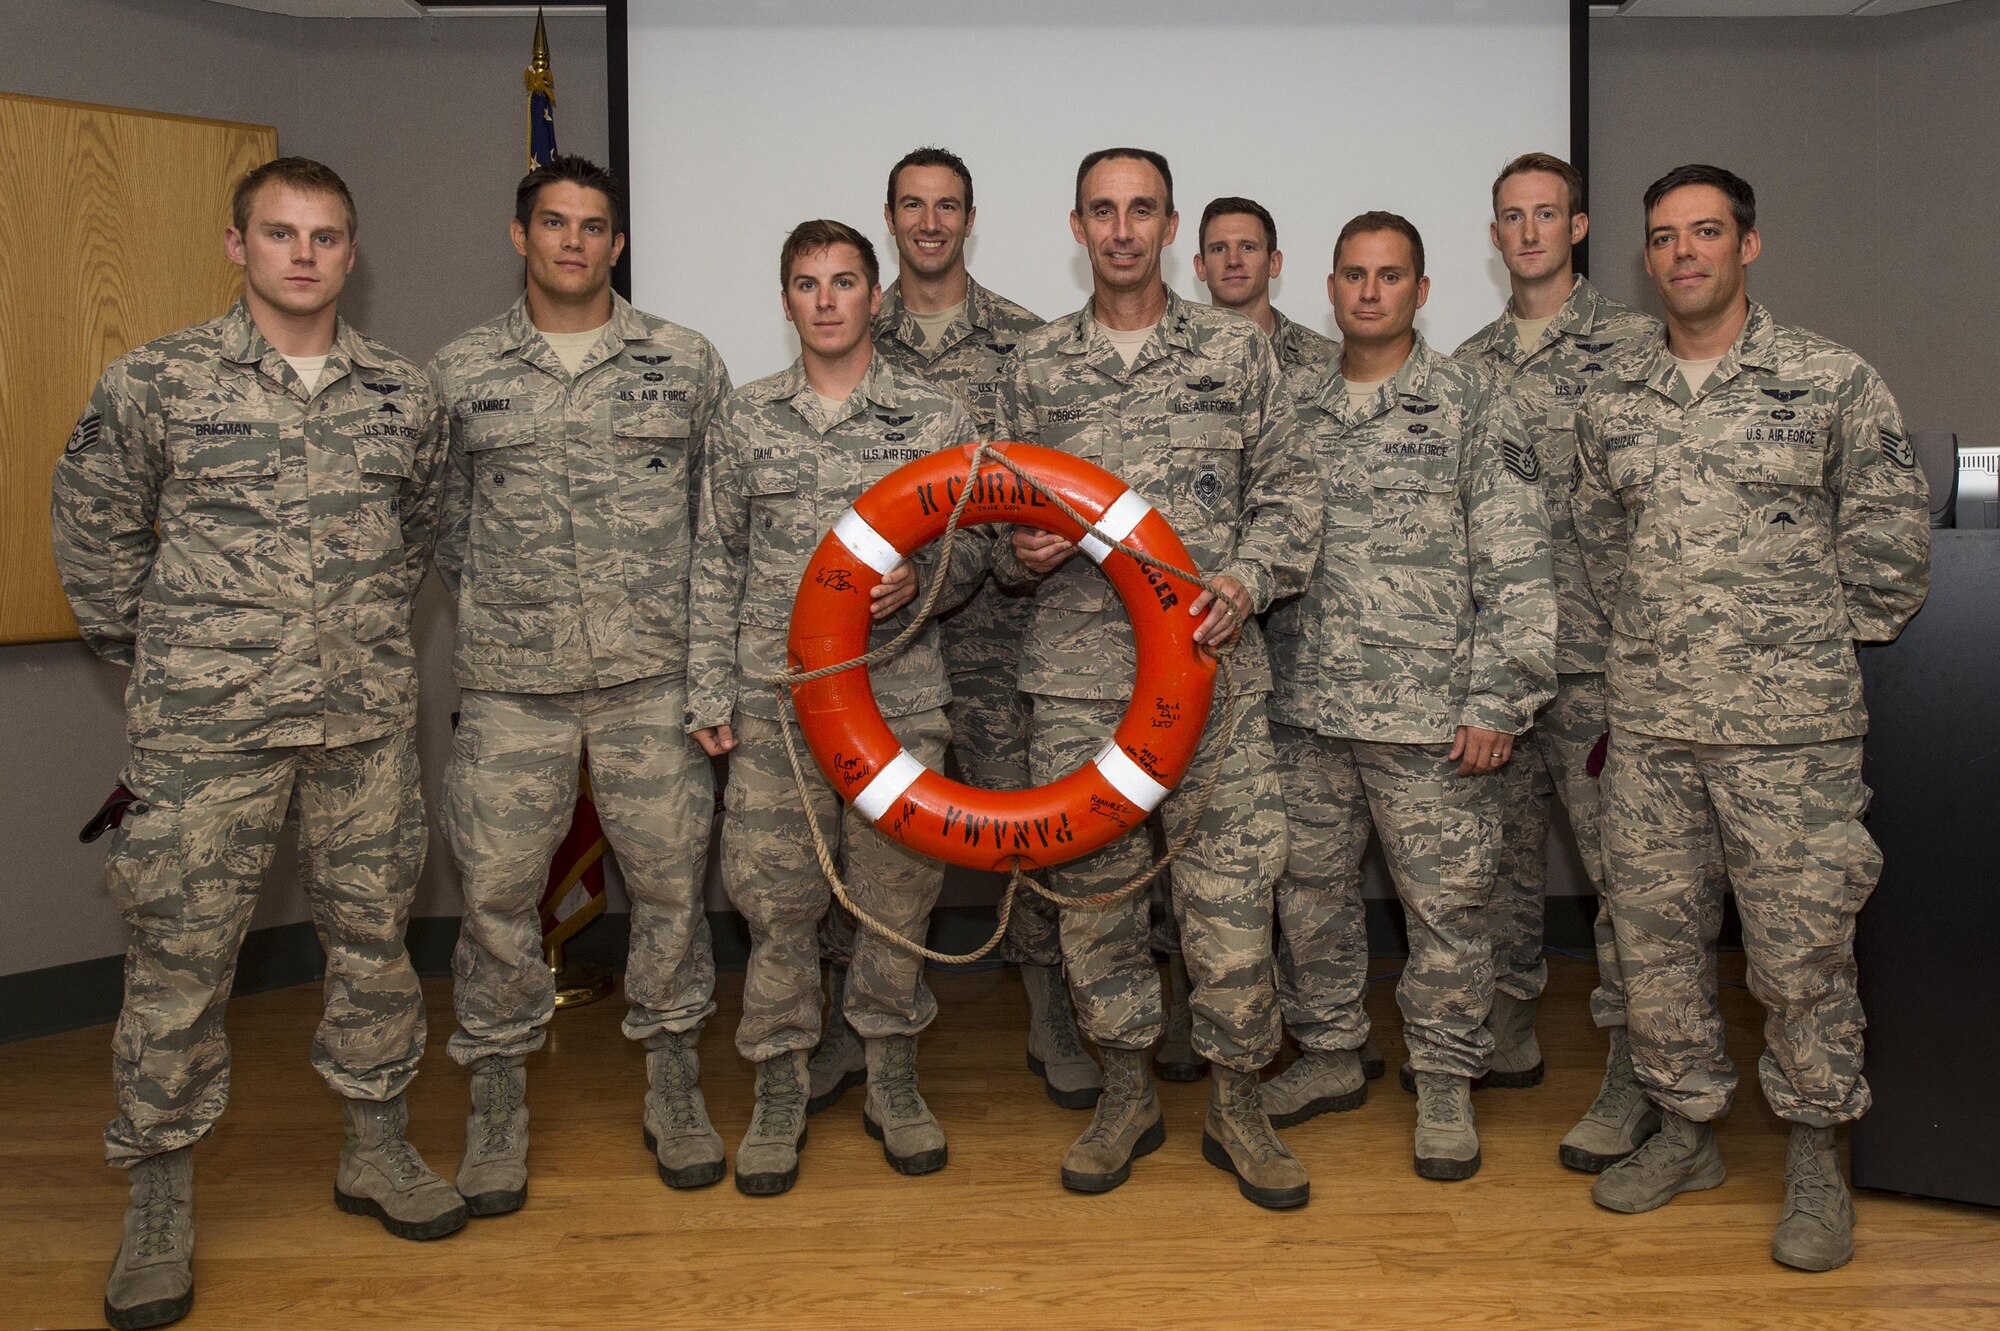 U.S. Air Force Maj. Gen. Scott Zobrist, Ninth Air Force commander, poses for a photo with Airmen from the 38th Rescue Squadron during his visit, June 28, 2016, at Moody Air Force Base, Ga. Zobrist thanked and coined the Airmen for their fearless efforts during a search and recovery mission last week. (U.S. Air Force photo by Senior Airman Ceaira Young/Released)